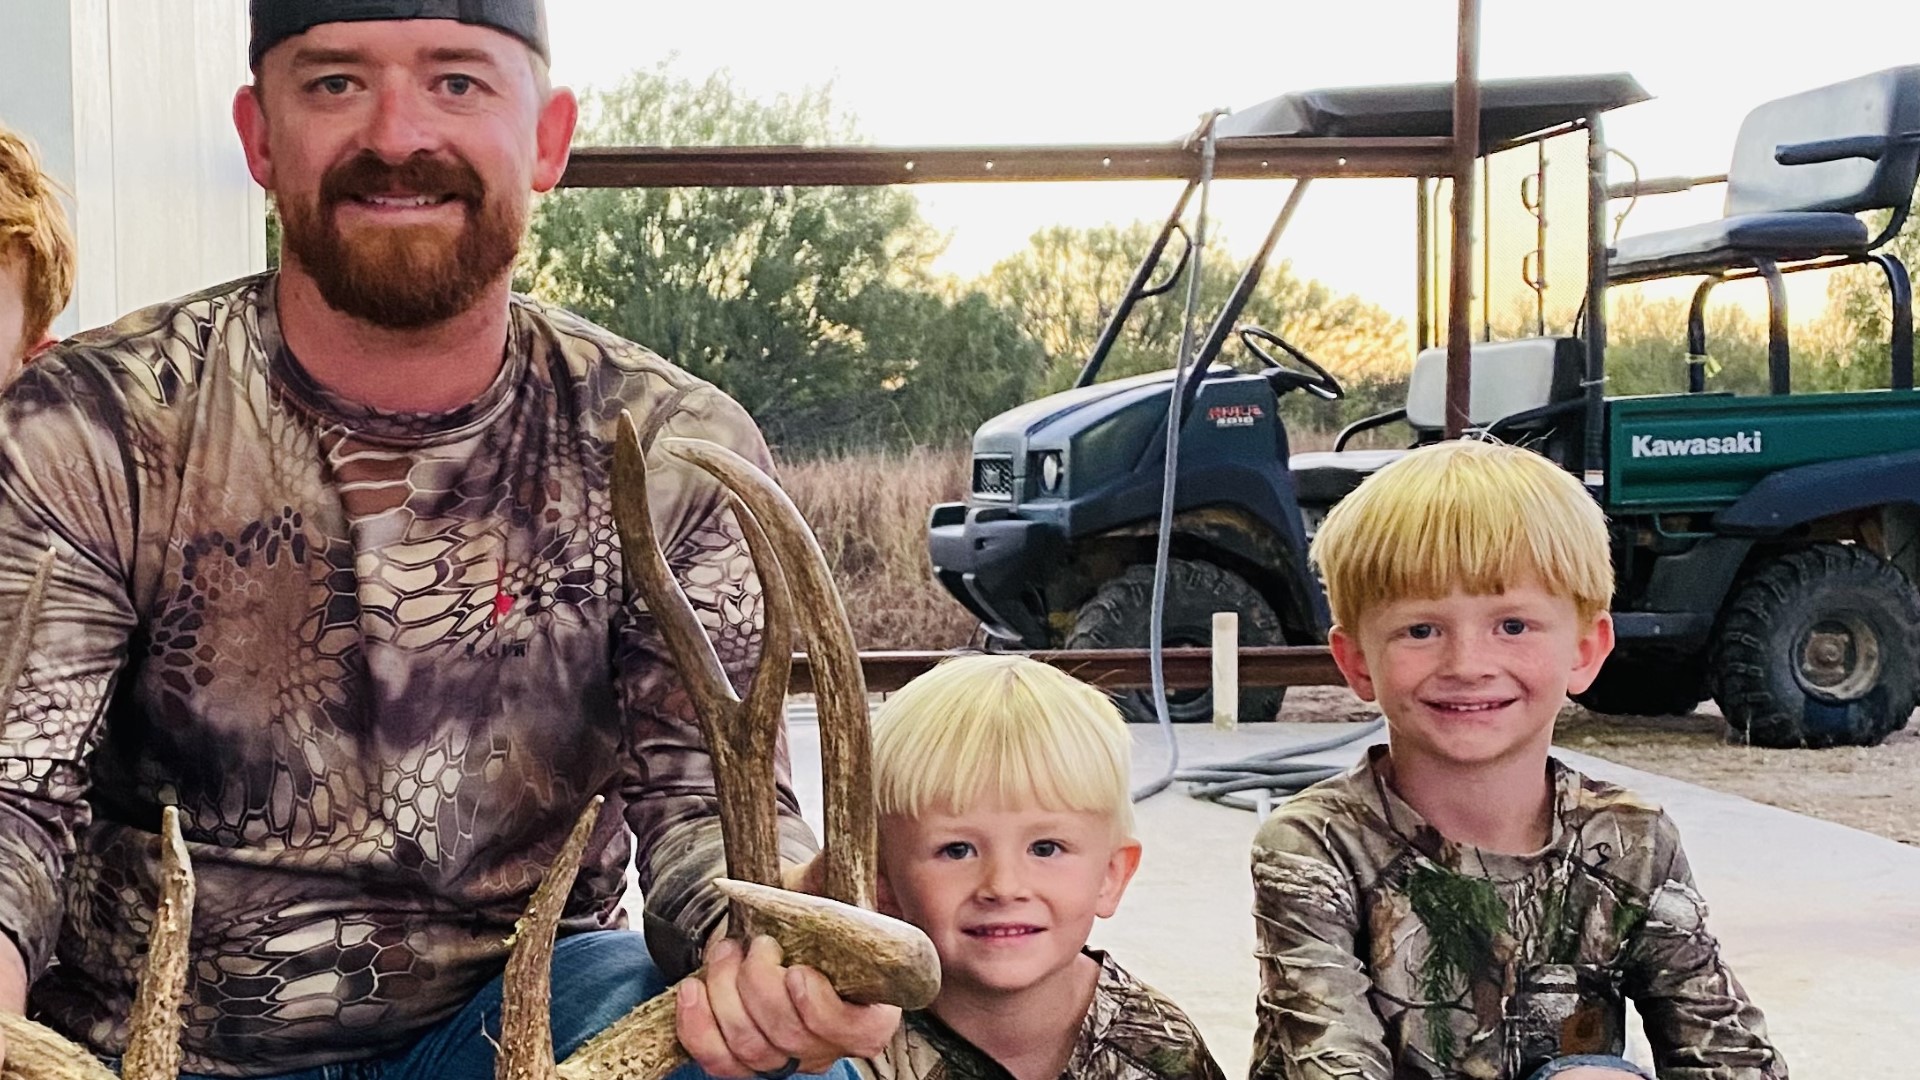 Dr. Heath Smith, 40, along with his sons Noah, 6, and Wyatt, 8, died Sunday when their plane crashed near Poolville. They were flying back from a hunting trip.